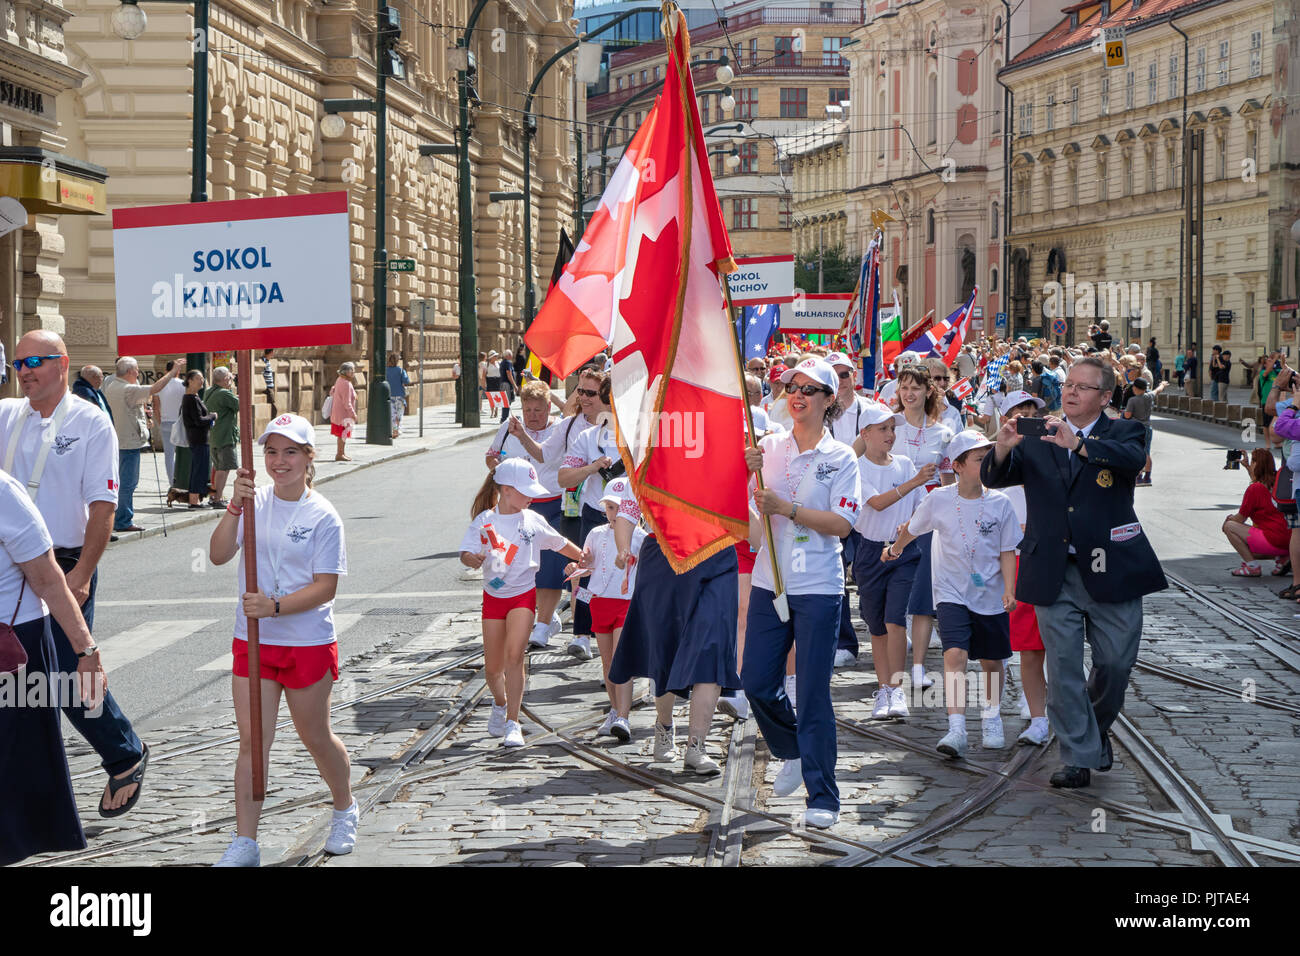 PRAGUE, CZECH REPUBLIC - JULY 1, 2018: Canadian visitors parading at Sokolsky Slet, a once-every-six-years gathering of the Sokol movement - a Czech s Stock Photo